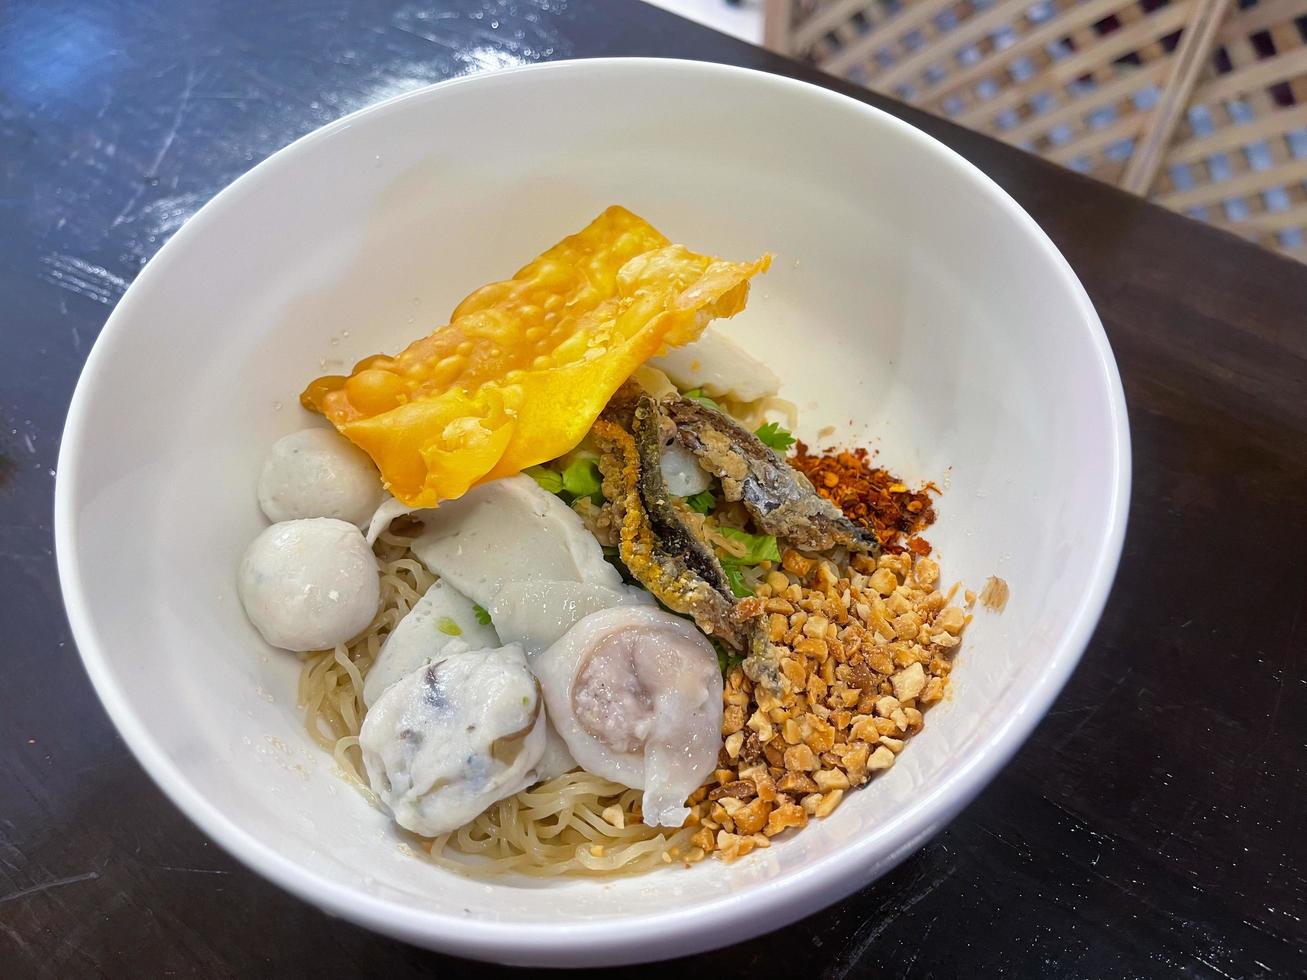 Thailand traditional dry noodles served with fish ball, fried tofu and other. A popular delicious street food of Thai peoples. Asian food. photo